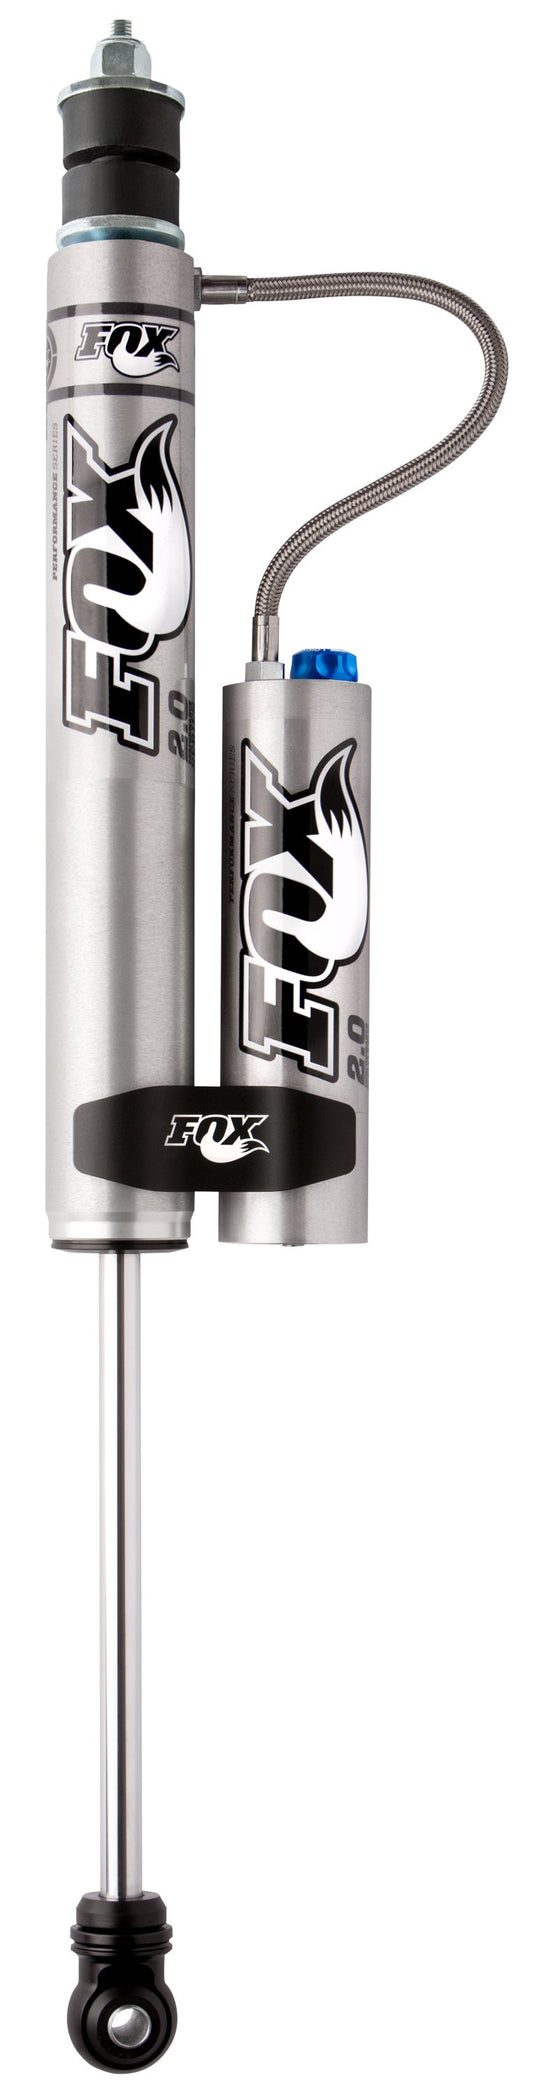 PERFORMANCE SERIES 2.0 SMOOTH BODY RESERVOIR SHOCK - ADJUSTABLE Lift: 7-9; Includes Billet Reservoir Clamp I Does not fit magnetic suspension 2011-2019 GMC Sierra 2500 HD FOX-980-26-968 - 2.0 SHOCK - FOX Offroad Shocks - Texas Complete Truck Center